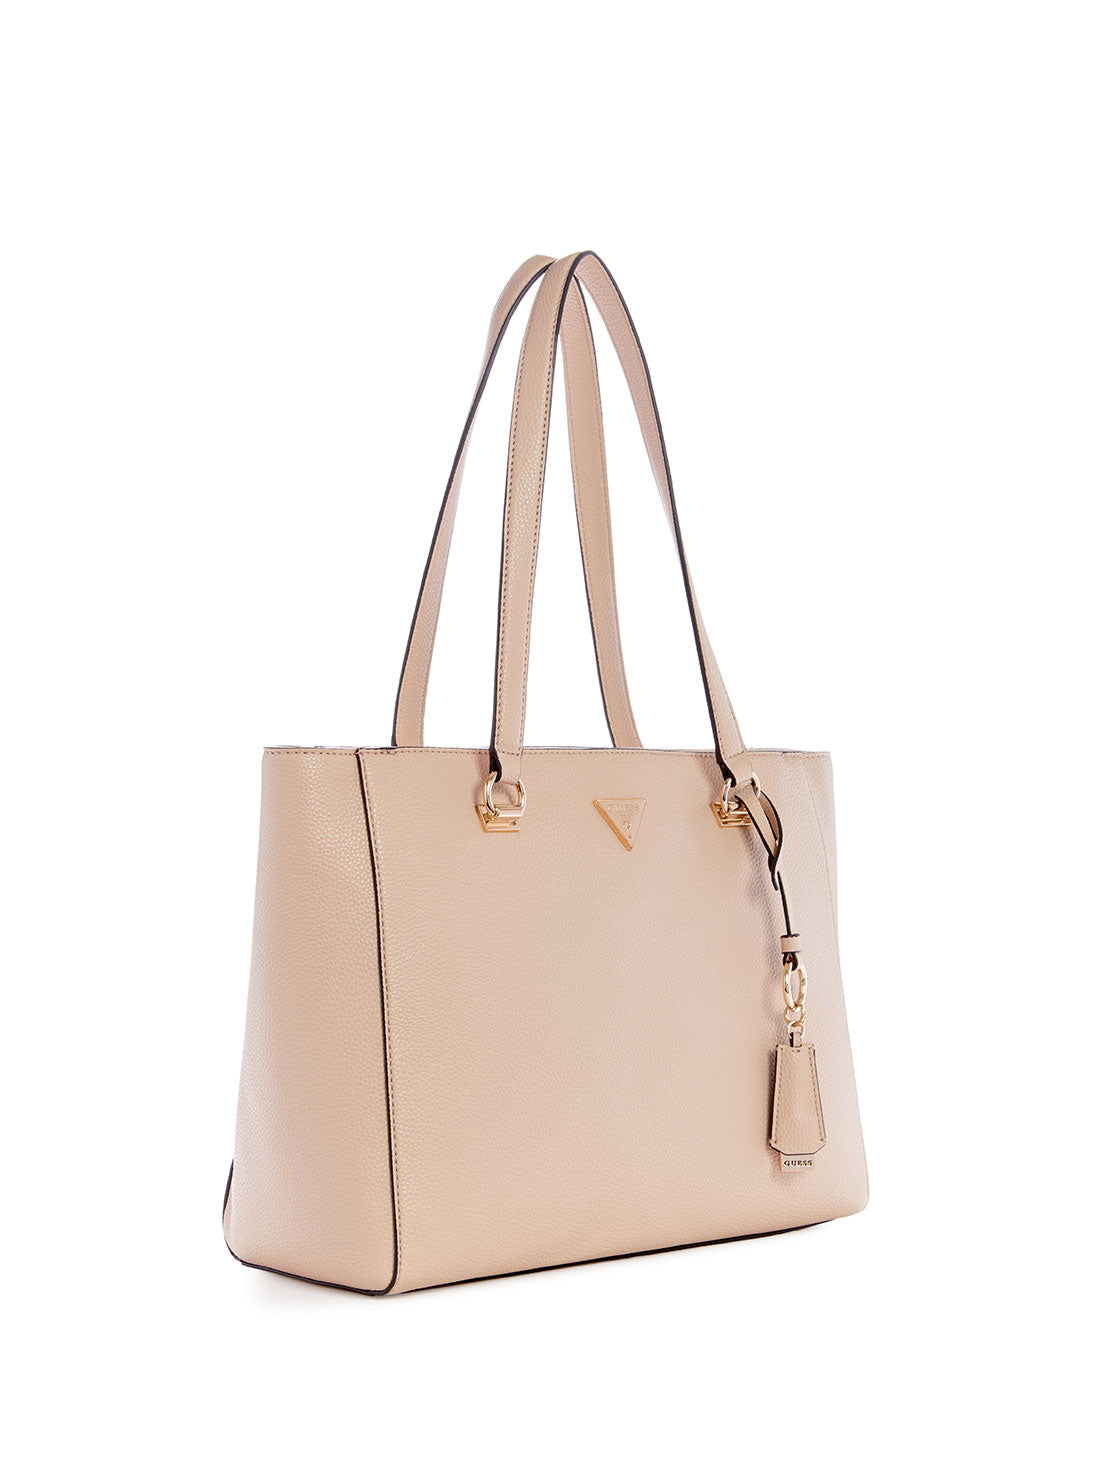 GUESS Women's Beige Taupe Emiliya Tote Bag side view